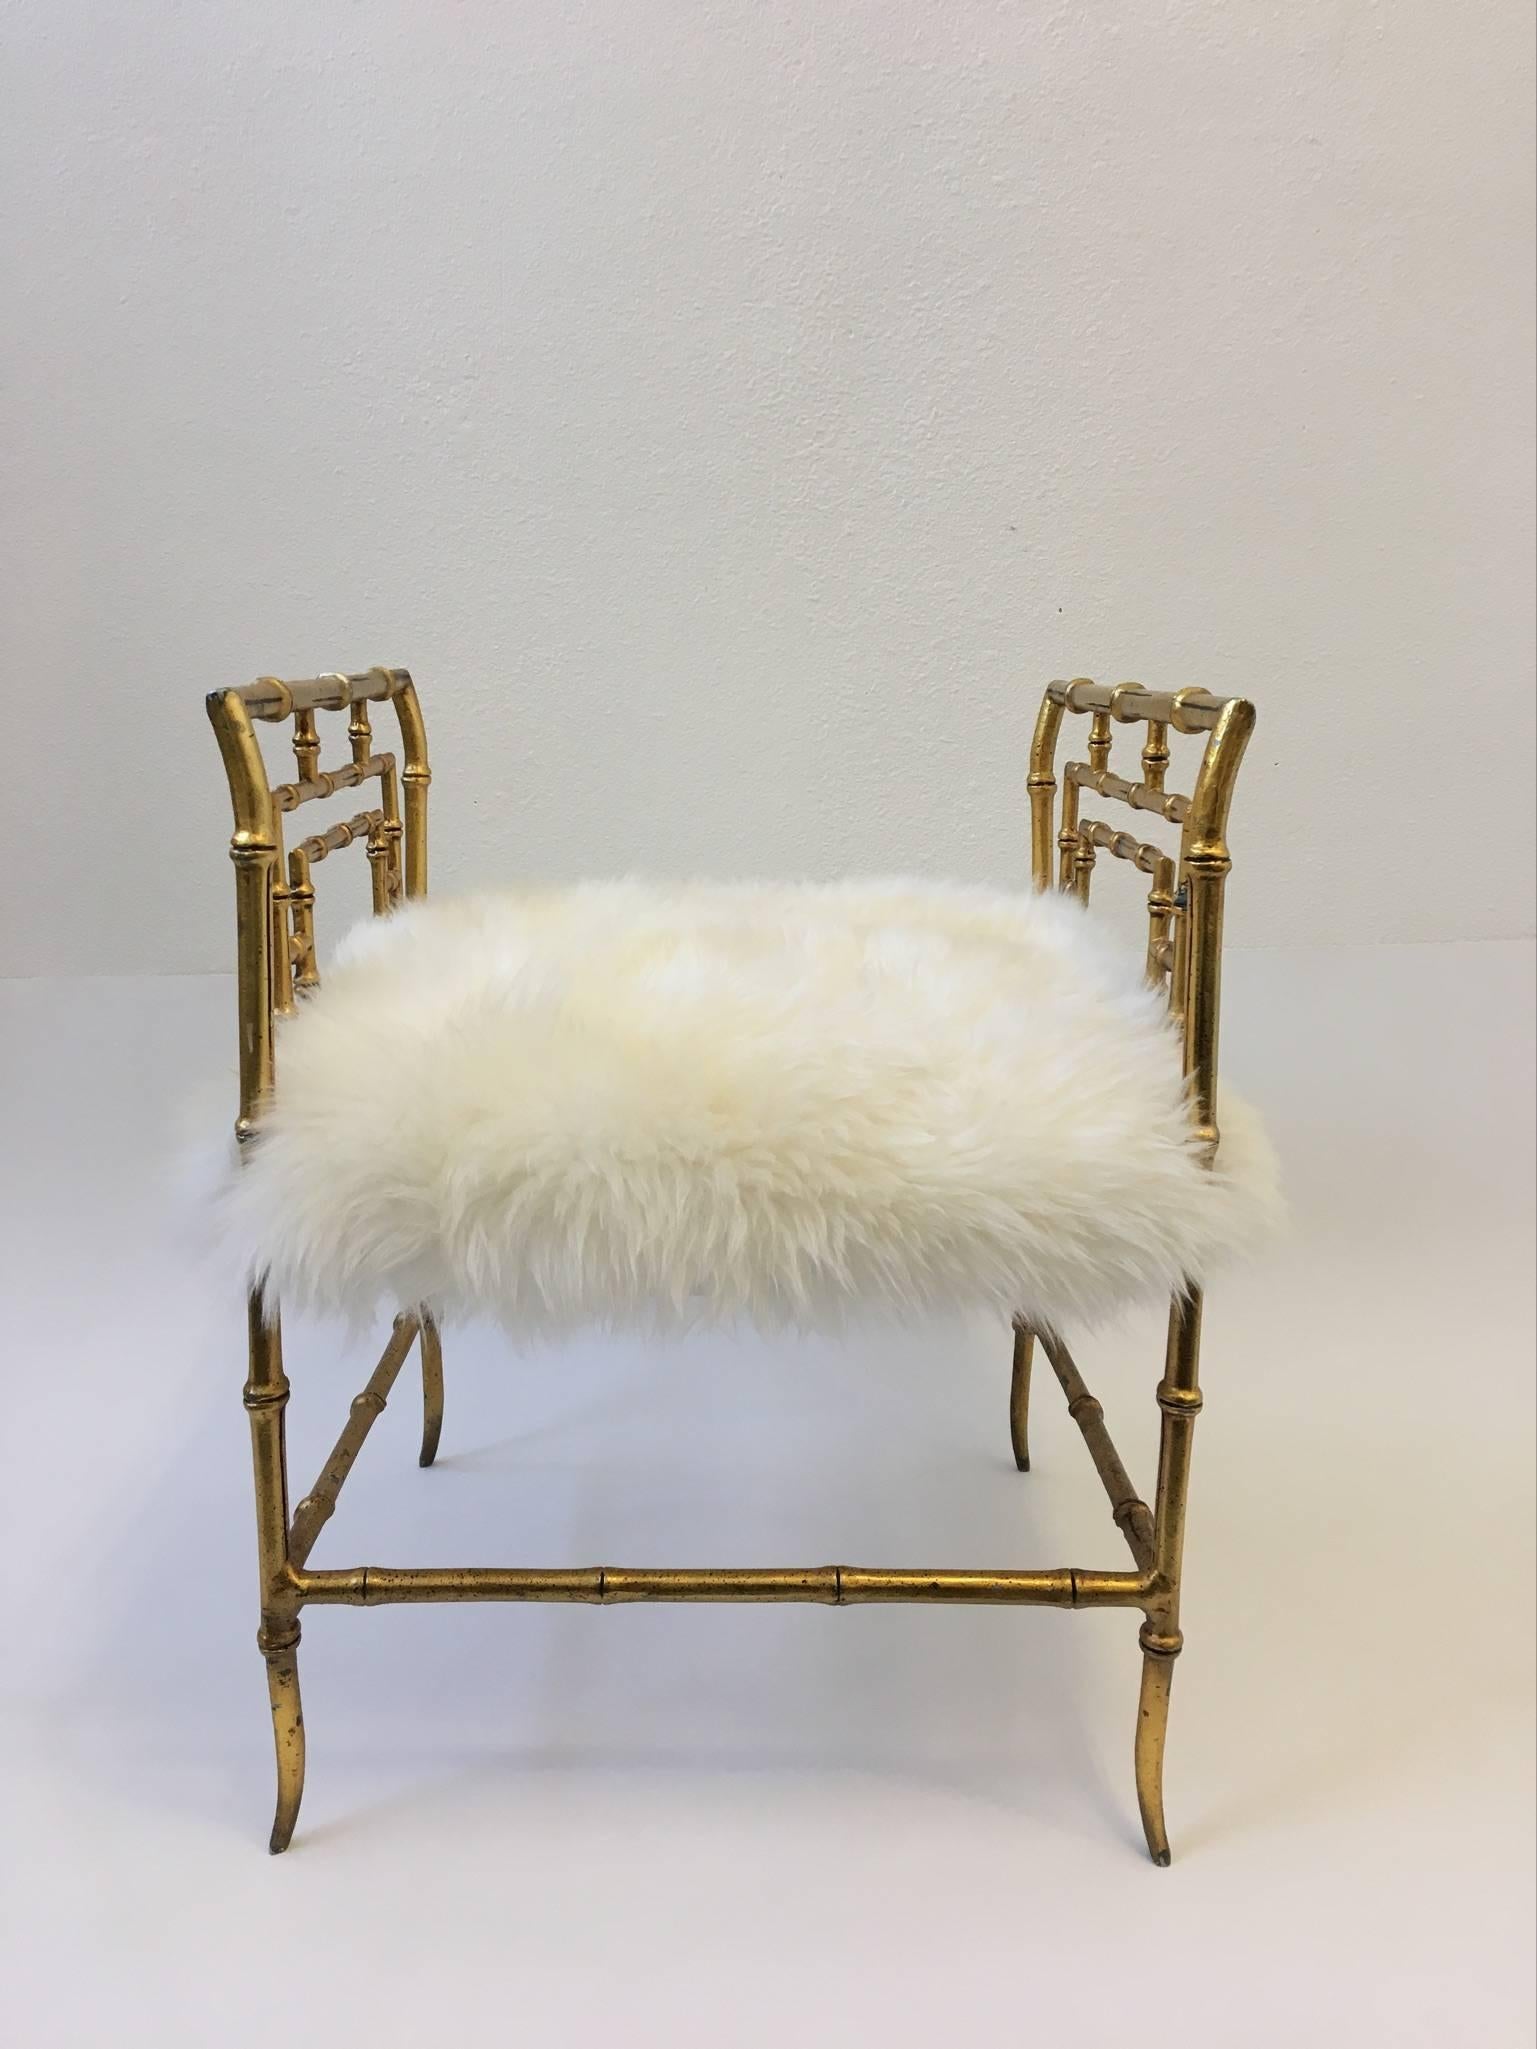 A glamorous 1970s gilded cast aluminium faux bamboo stool. The seat has been newly recovered with a nice off-white sheepskin.

Dimension: 24.5" high, 18" seat, 19" wide, 18" deep.